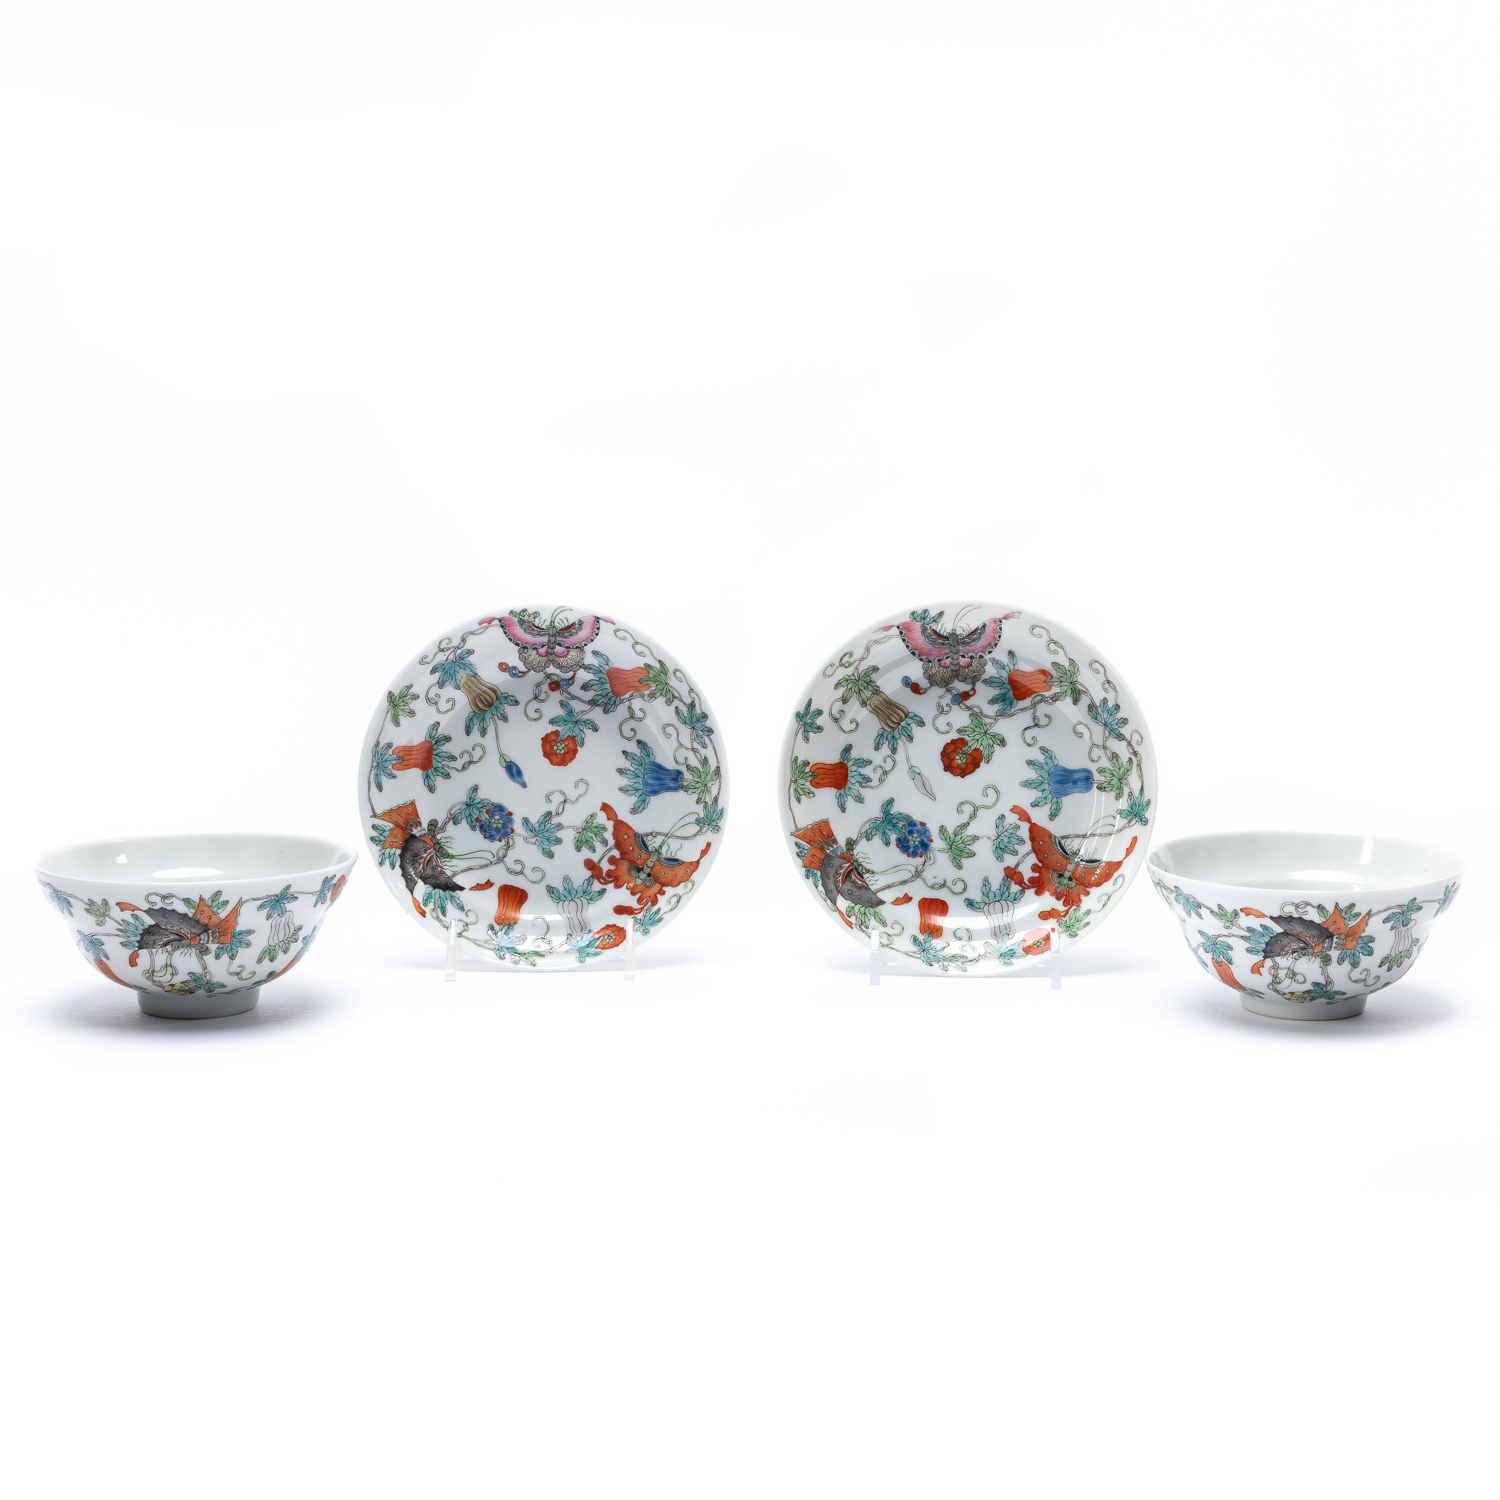 4PCS, PAIR CHINESE BUTTERFLY BOWLS